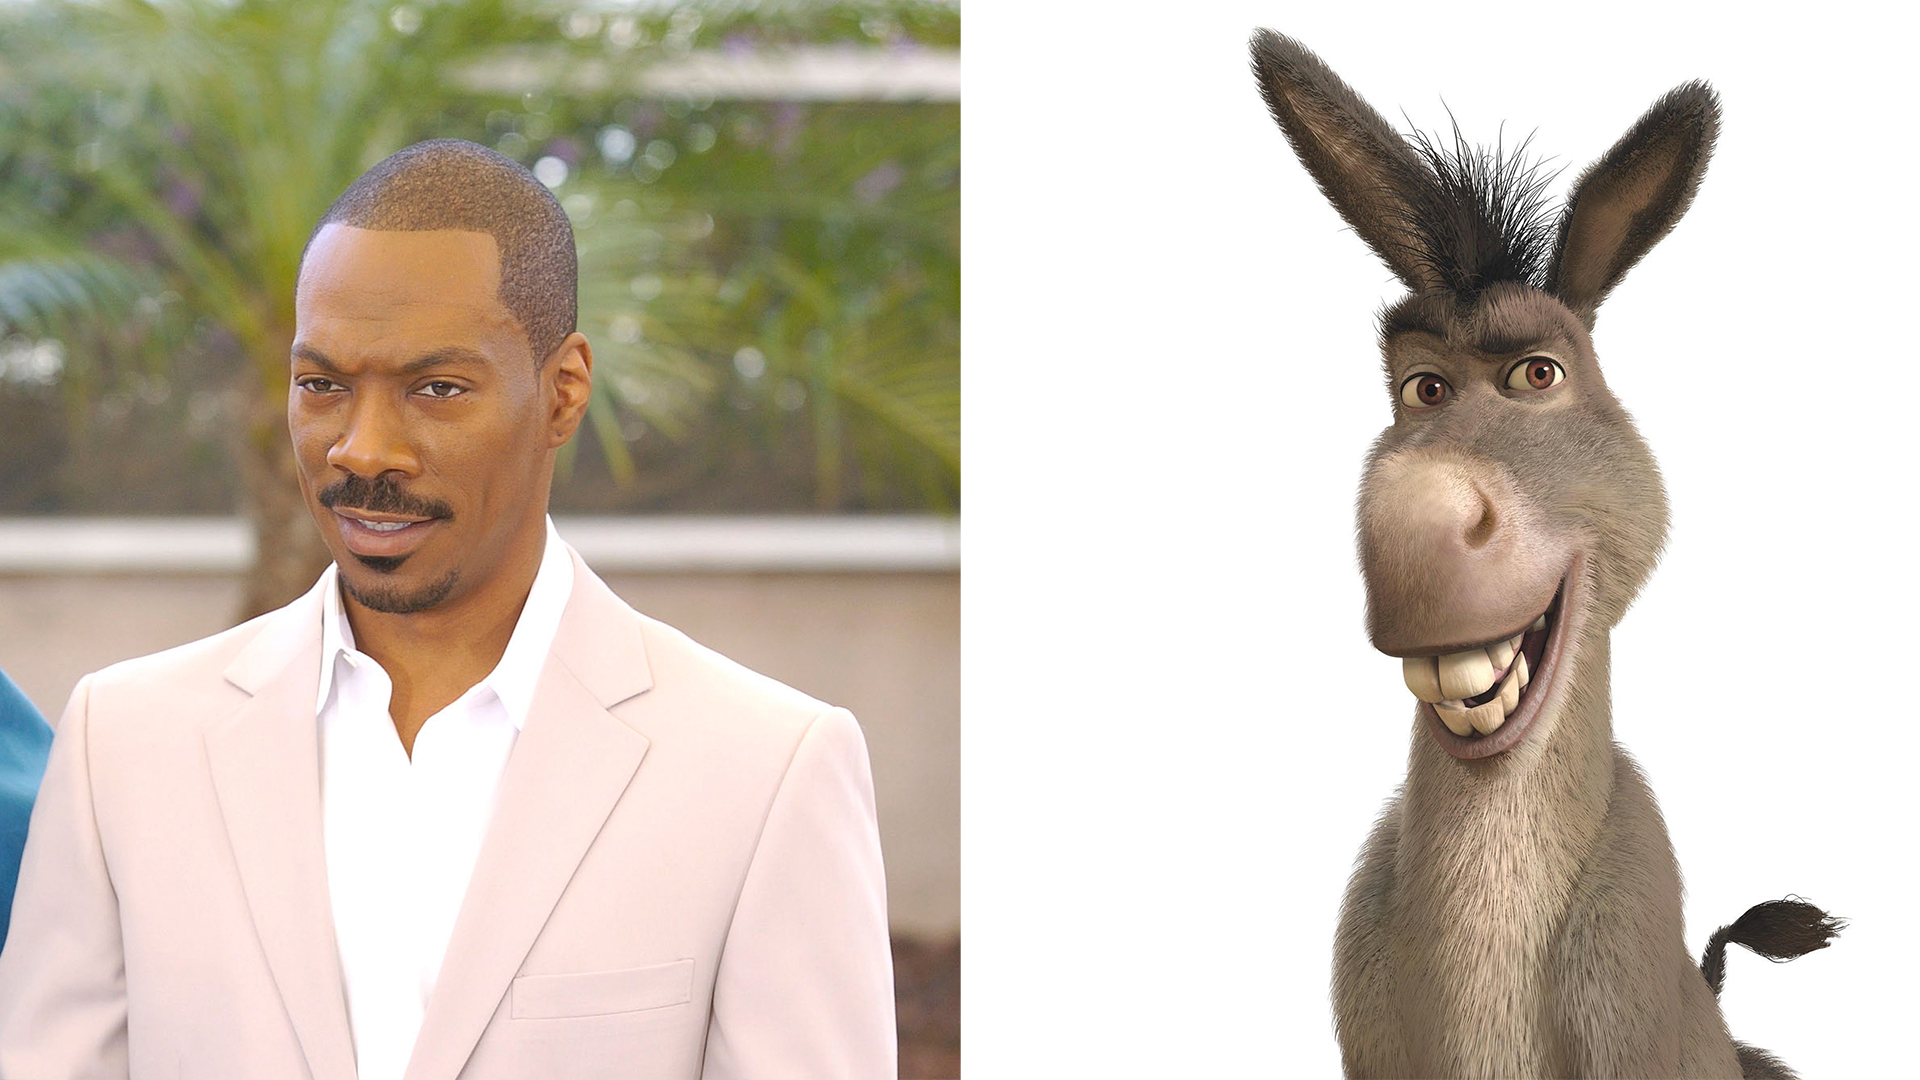 9 Cartoon Characters Based On Celebrities: Their Resemblance is Uncanny